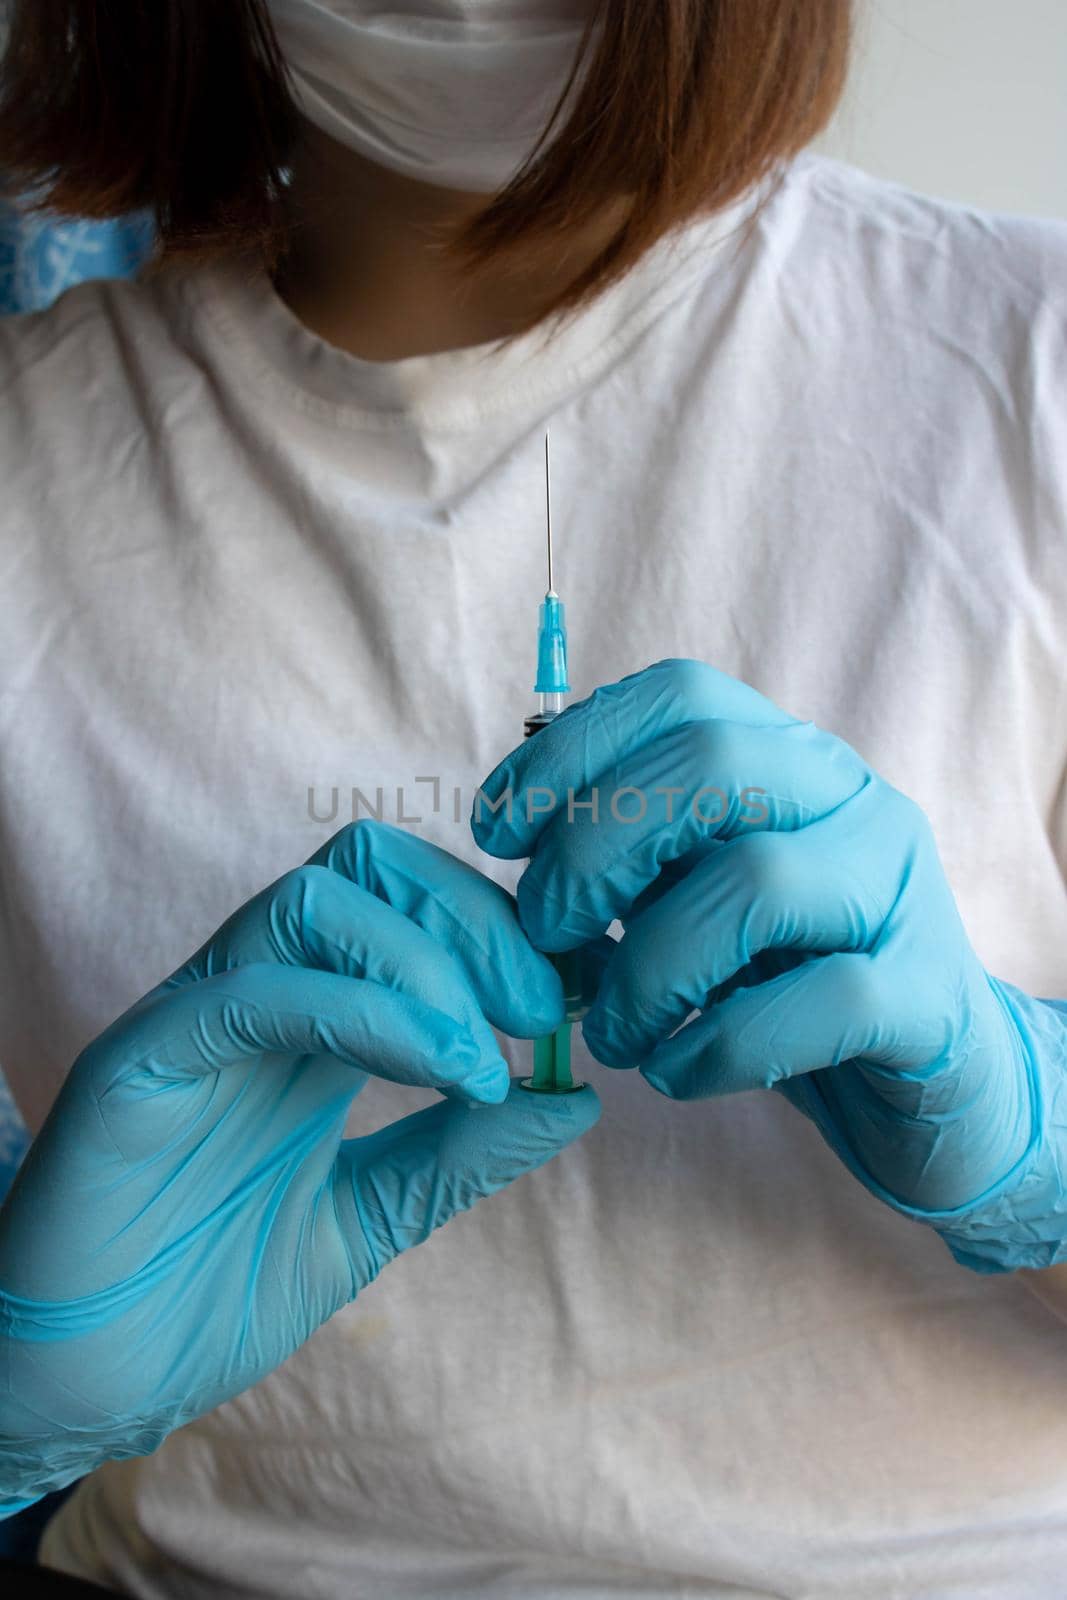 A syringe with a needle in the hand of a girl in a surgical mask and medical gloves.